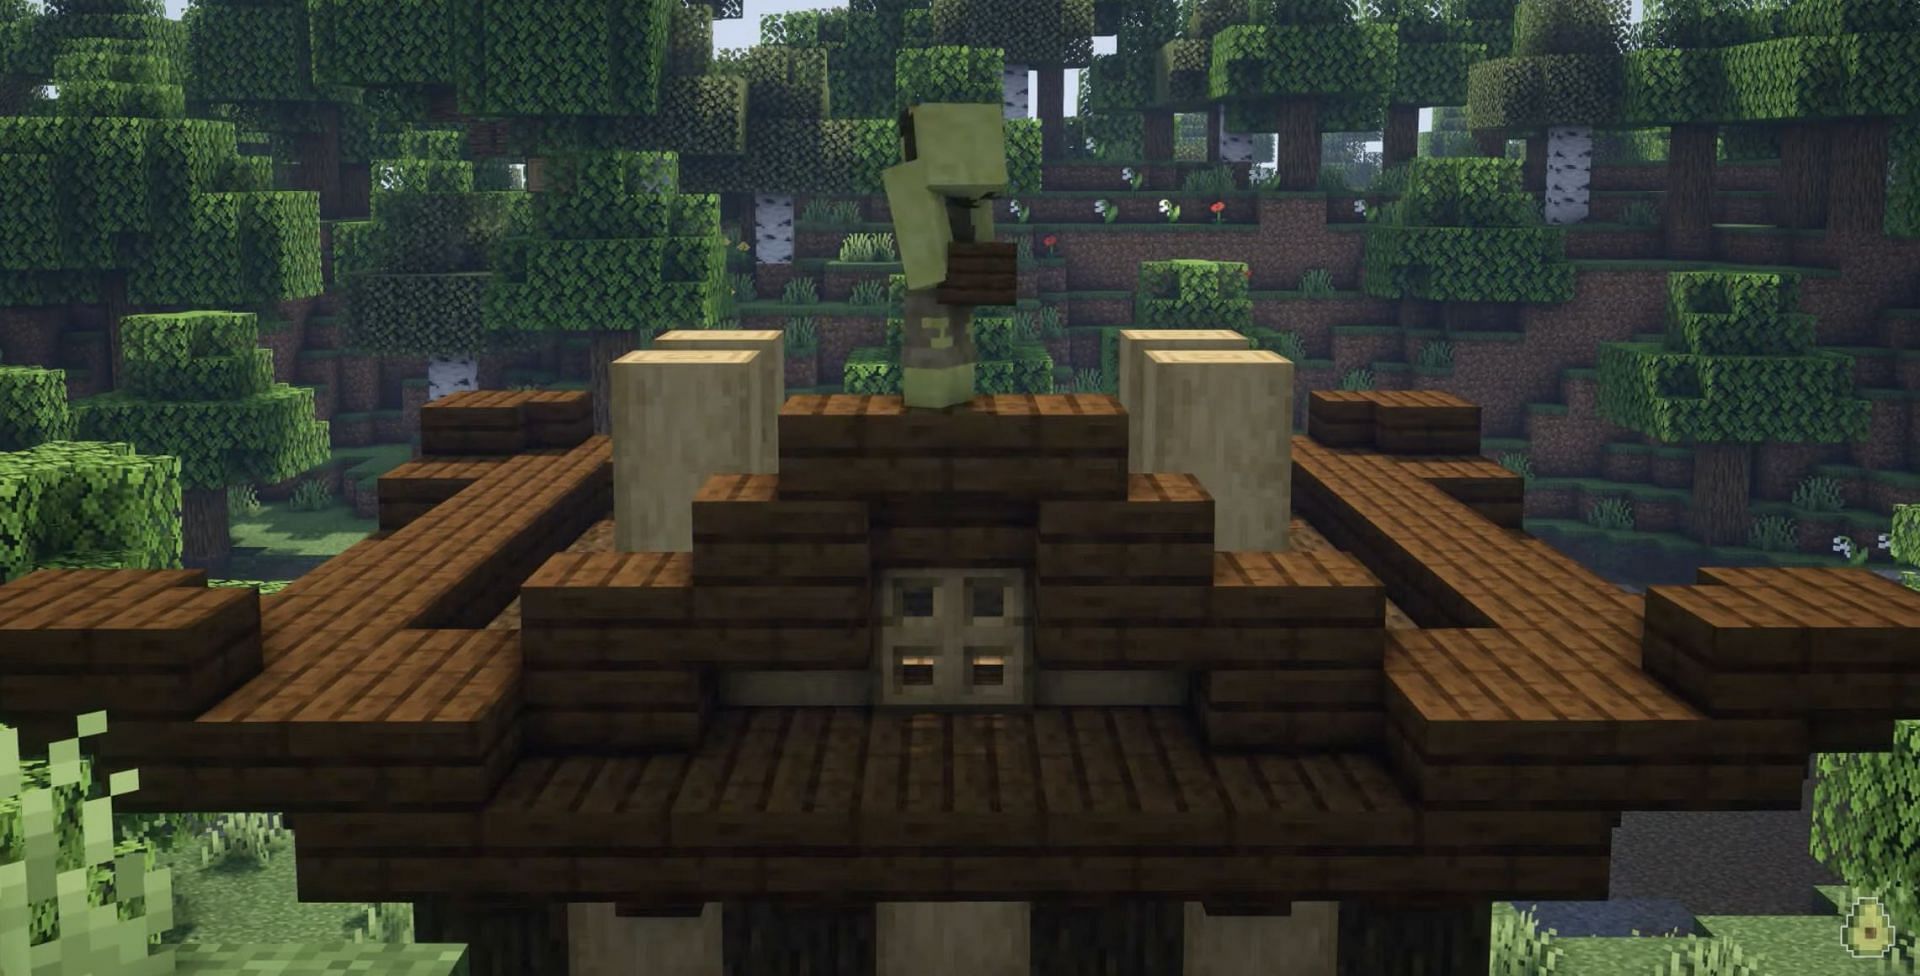 The front of the roof (Image via Ayvocado/YouTube)